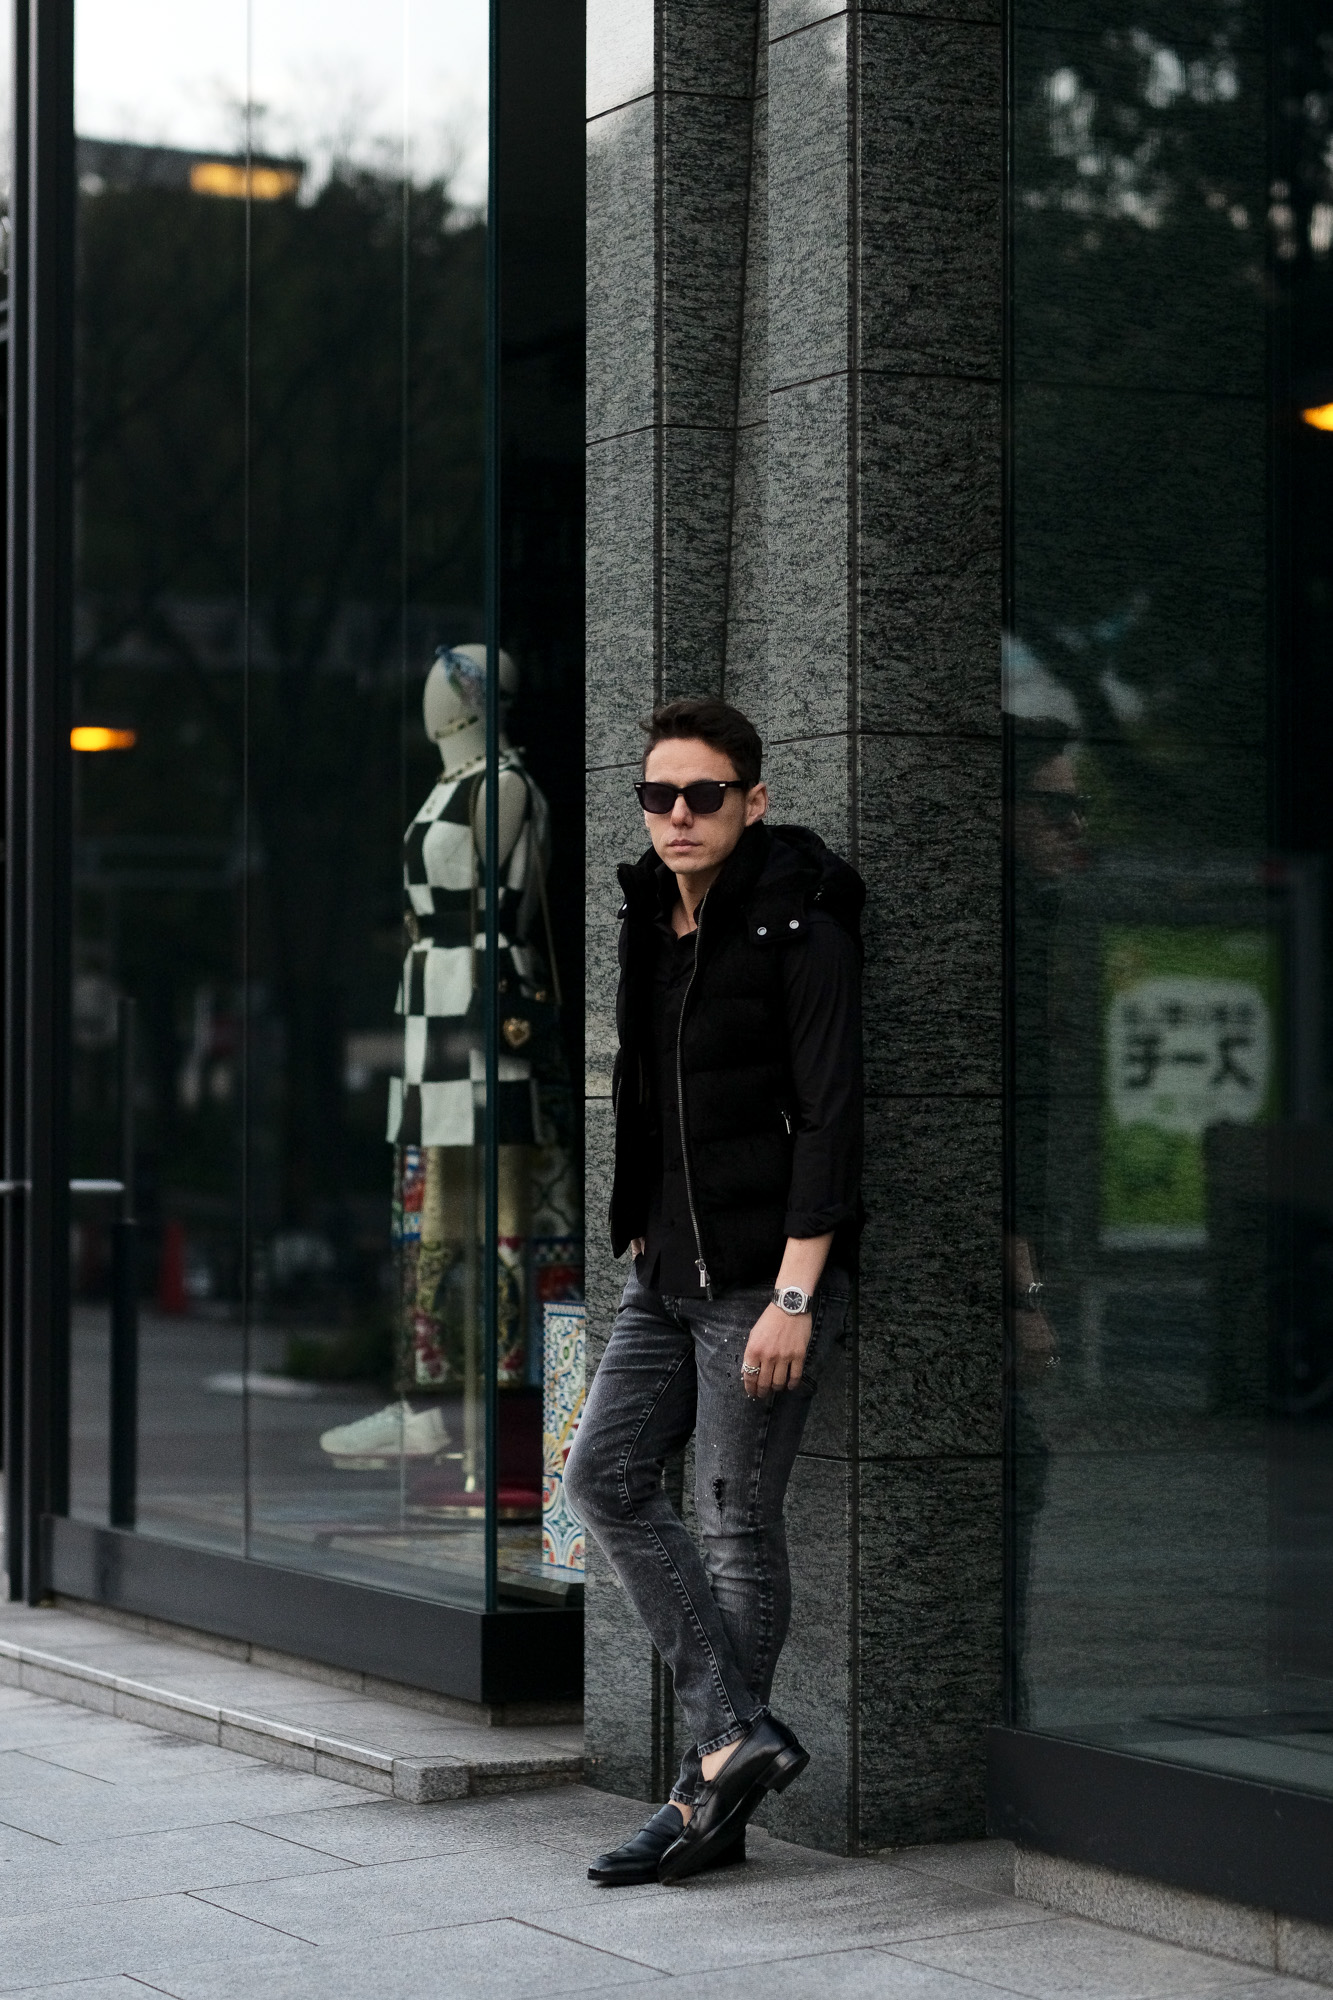 MOORER (ムーレー) FAYER-UR (フェイヤー) Suede Leather Down Vest スエードレザー ダウンベスト NERO (ブラック) Made in italy (イタリア製) 2021 秋冬 【Alto e Diritto別注】【Special Special Special Model】【ご予約開始】愛知 名古屋 Alto e Diritto altoediritto アルトエデリット レザーベスト